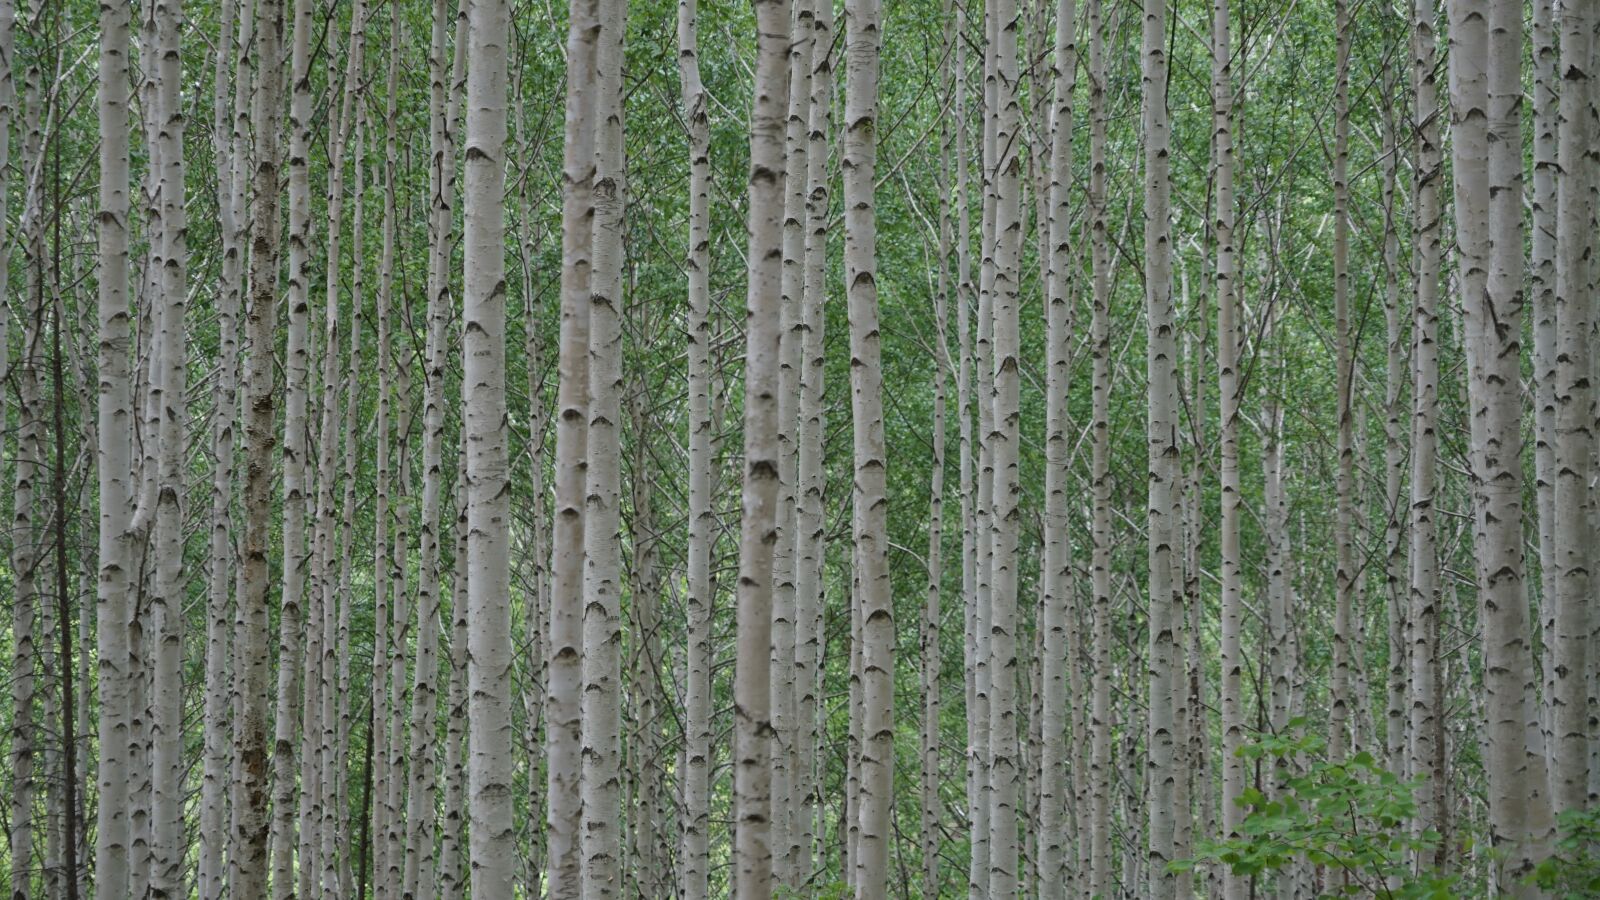 Sony a7 II sample photo. Birch, forest, nature photography